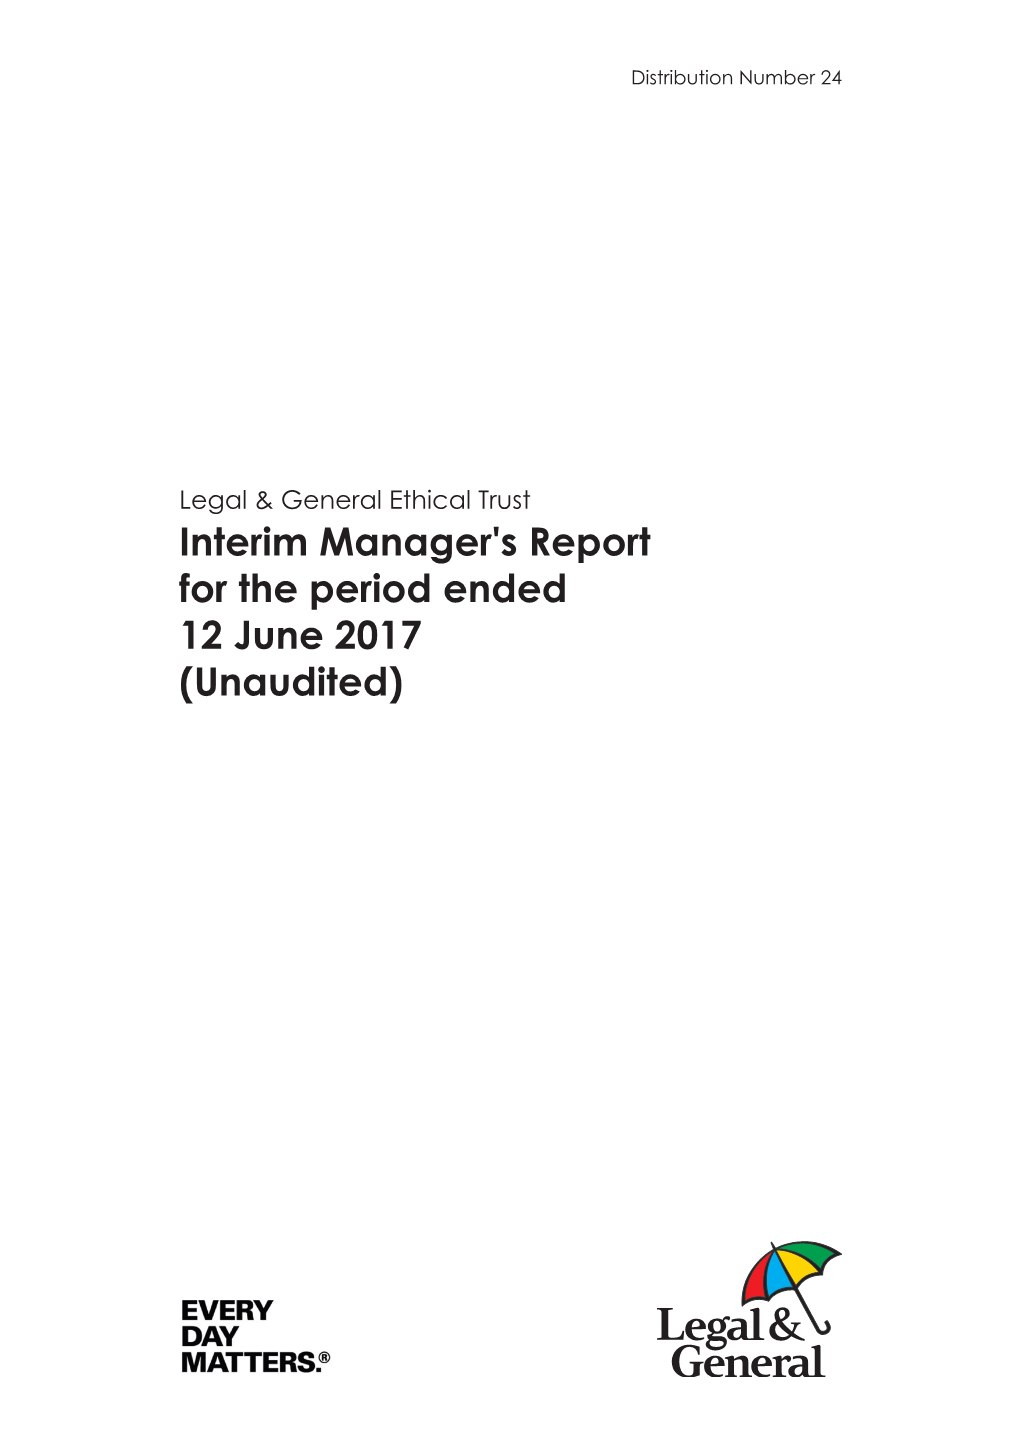 Interim Manager's Report for the Period Ended 12 June 2017 (Unaudited)